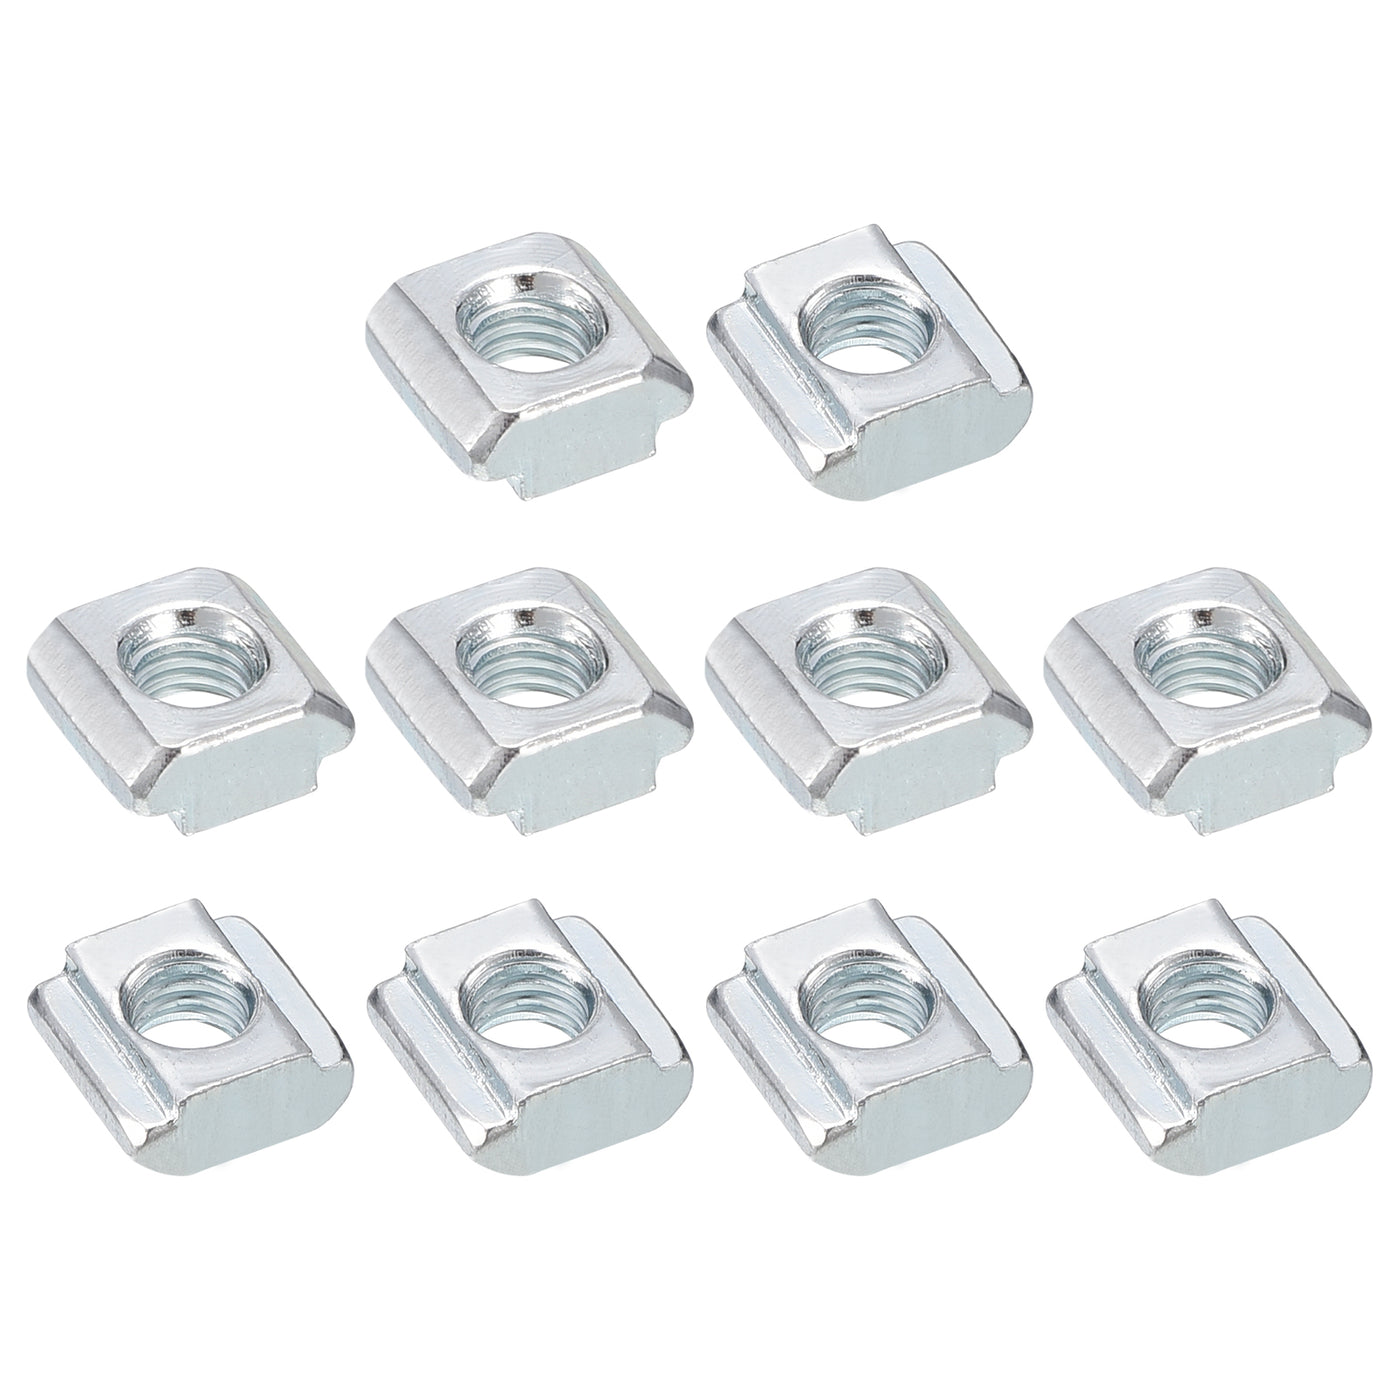 uxcell Uxcell T Nuts, 50pcs - Nickel Plated Carbon Steel T Slot Bolts, 2020 Series M5 Hammer Head Fastener, Sliding T Nuts for Aluminum Extrusion Profile (Silver)